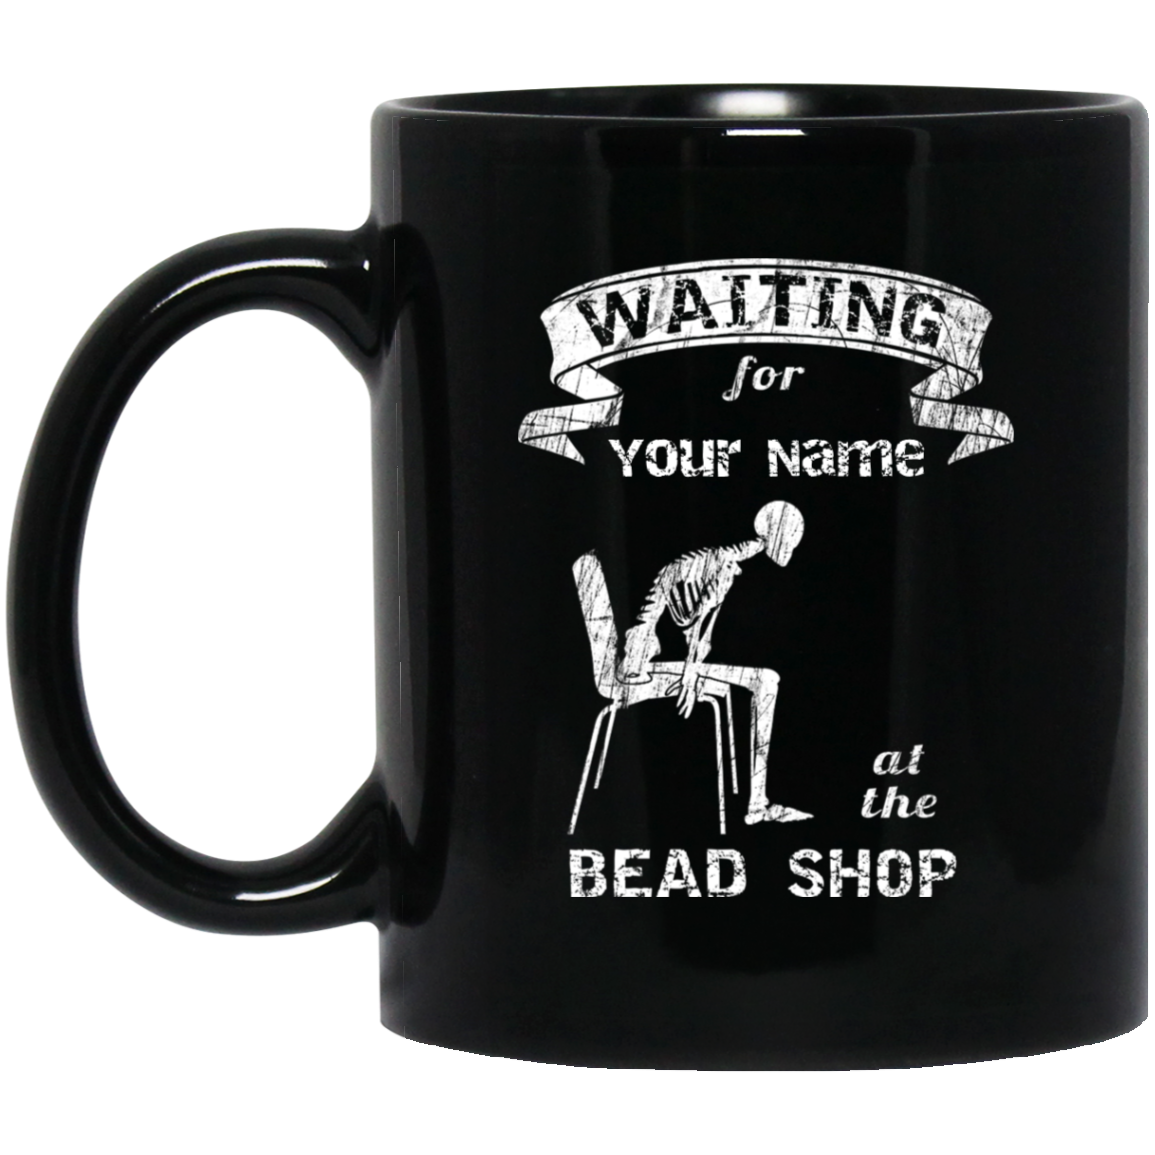 Waiting at the Bead Shop - Personalized Black Mugs